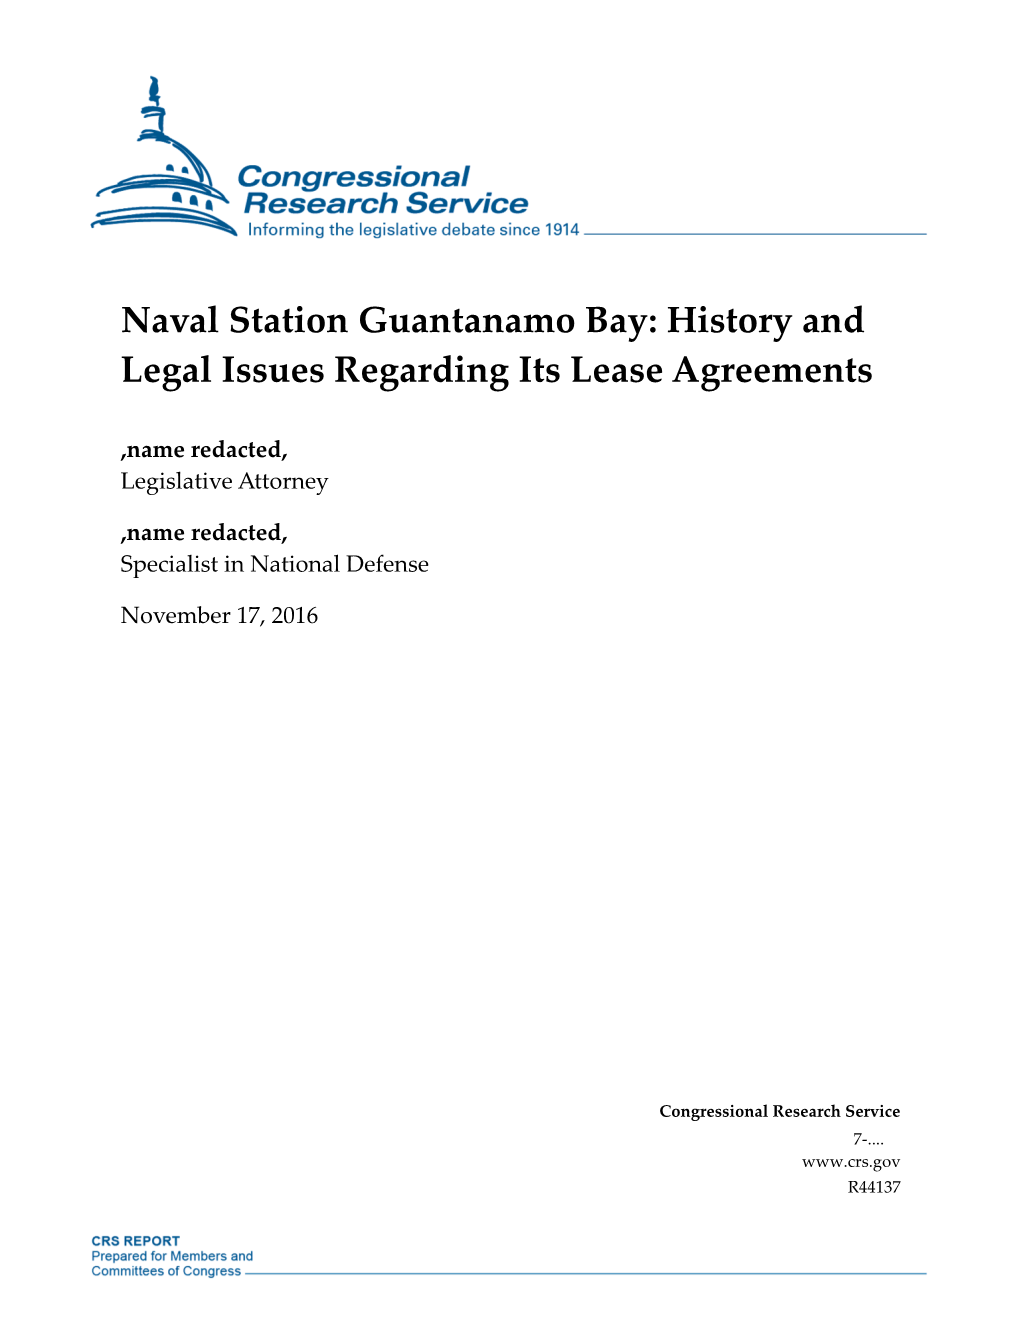 Naval Station Guantanamo Bay: History and Legal Issues Regarding Its Lease Agreements